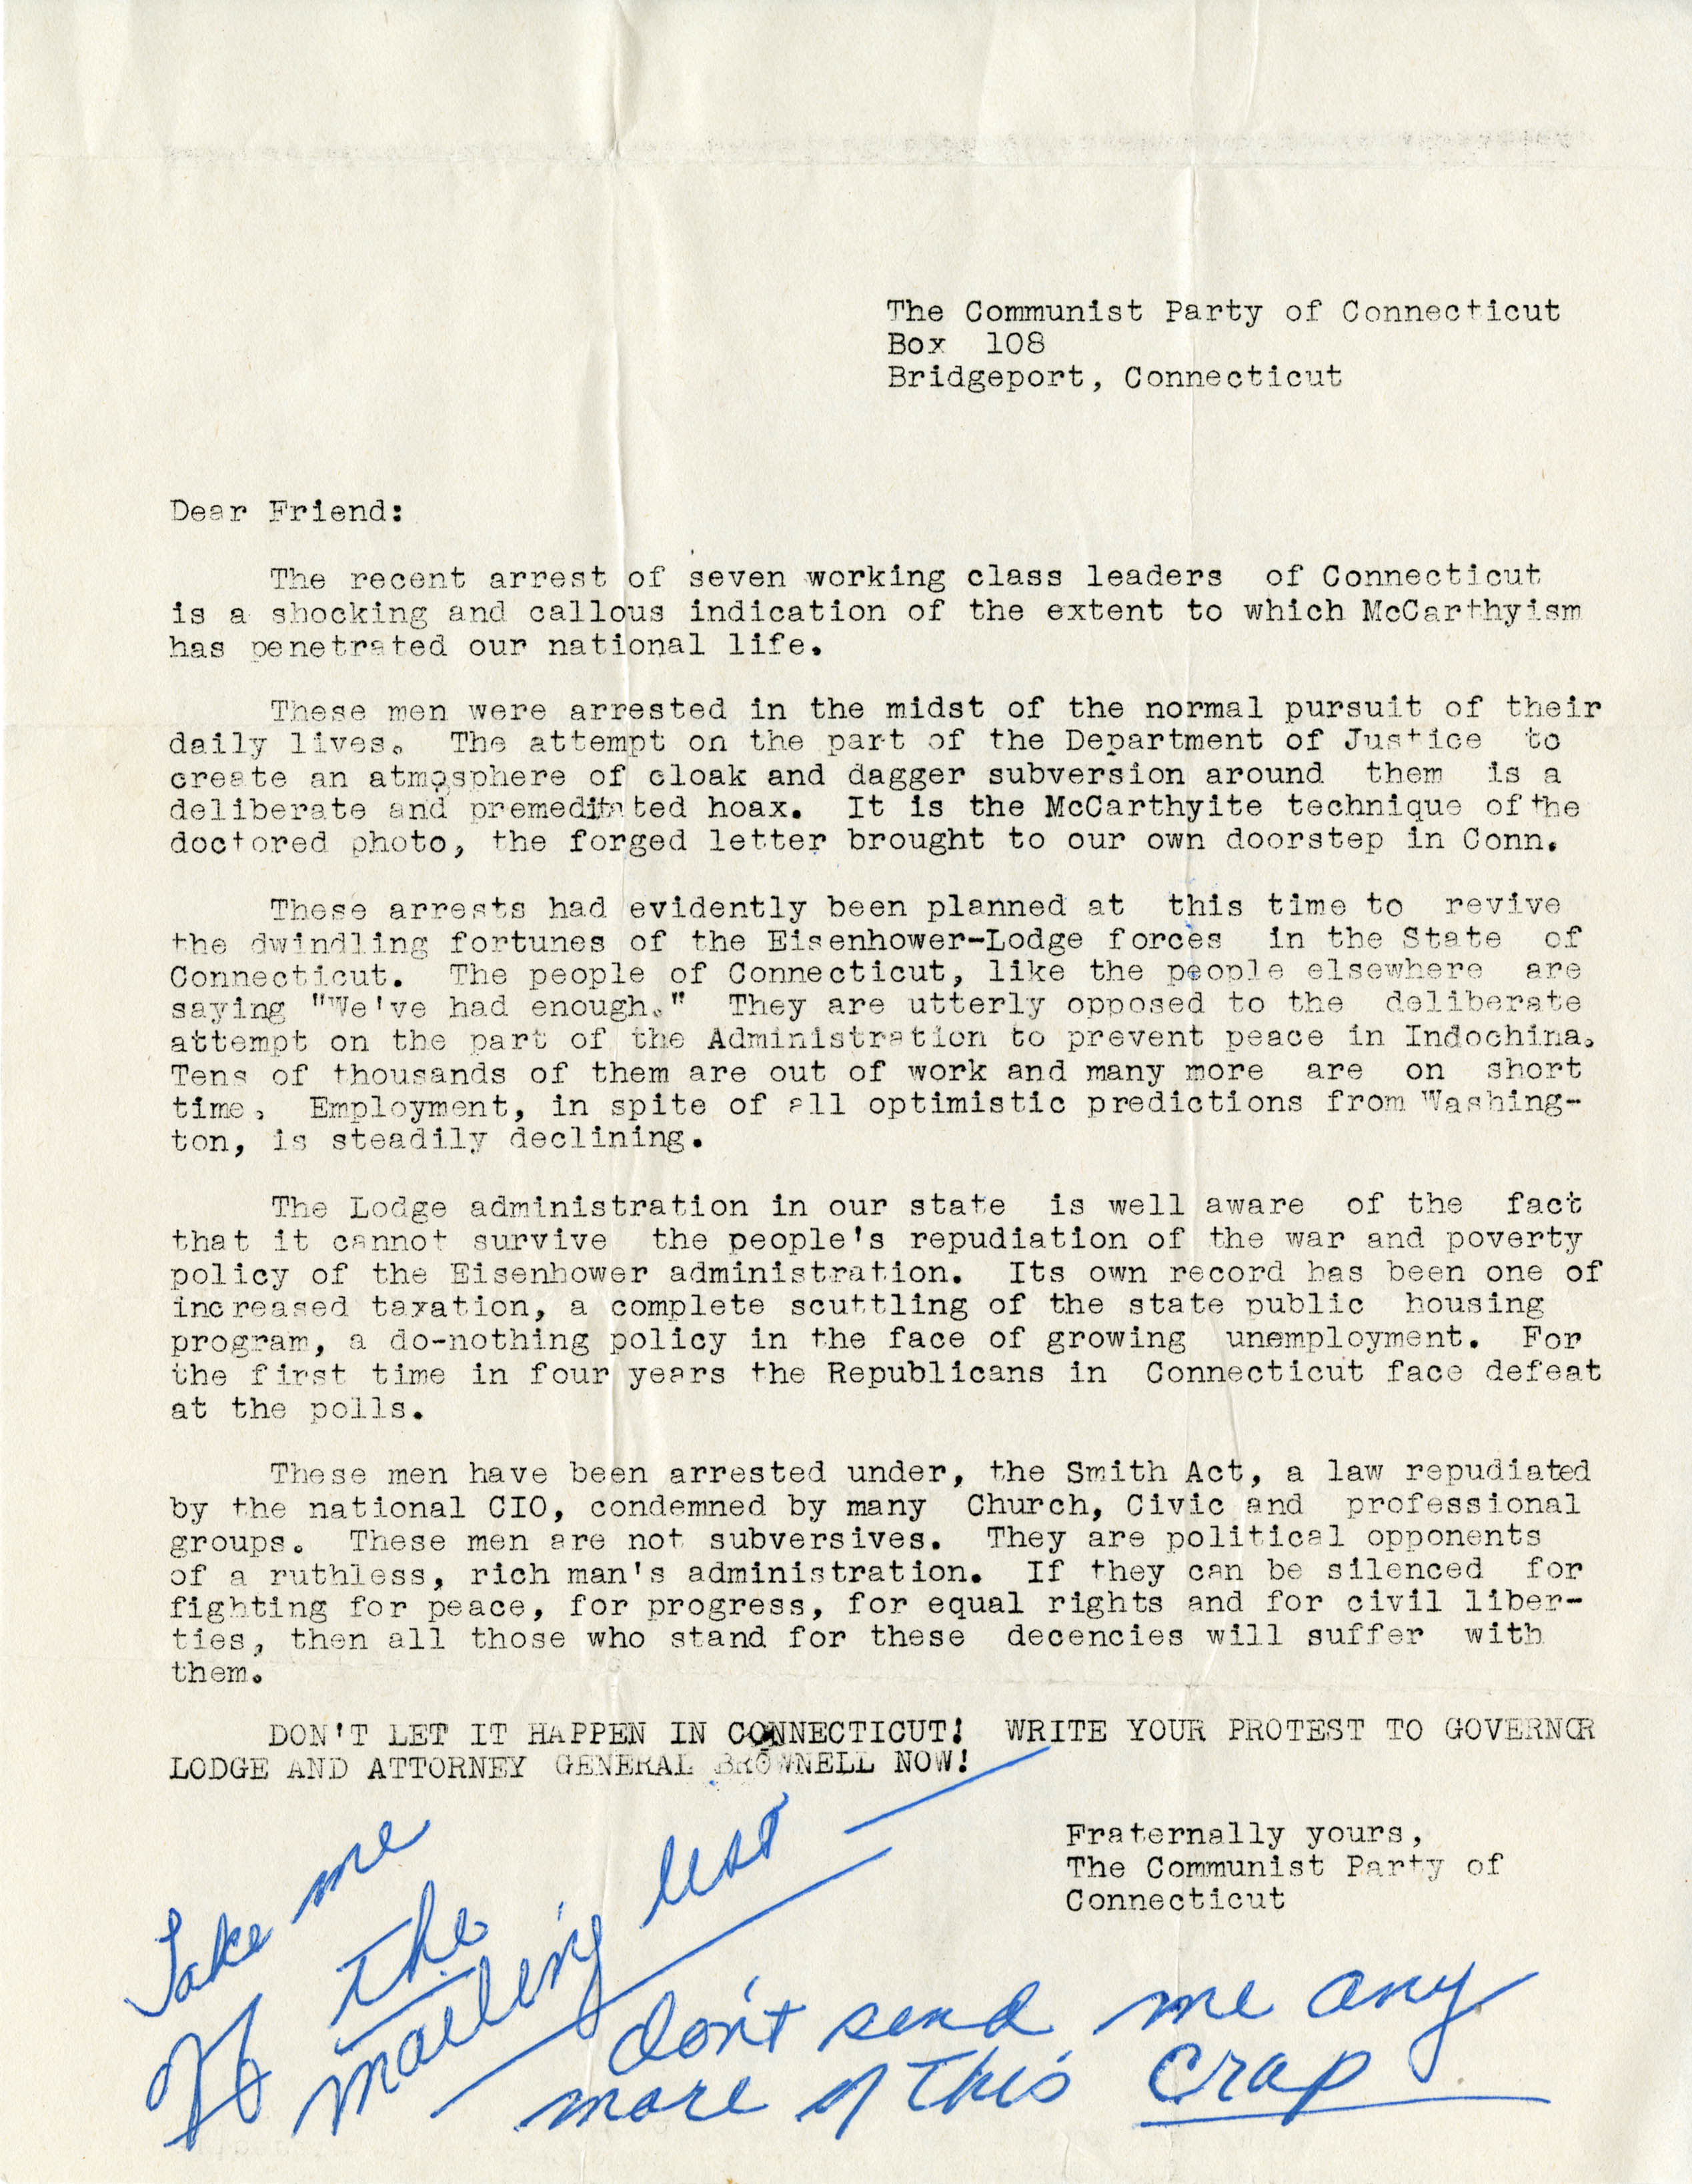 Undated letter written by the Communist Party of Connecticut asking for donations with a handwritten response from an unidentified person telling the Party to take him off their mailing list